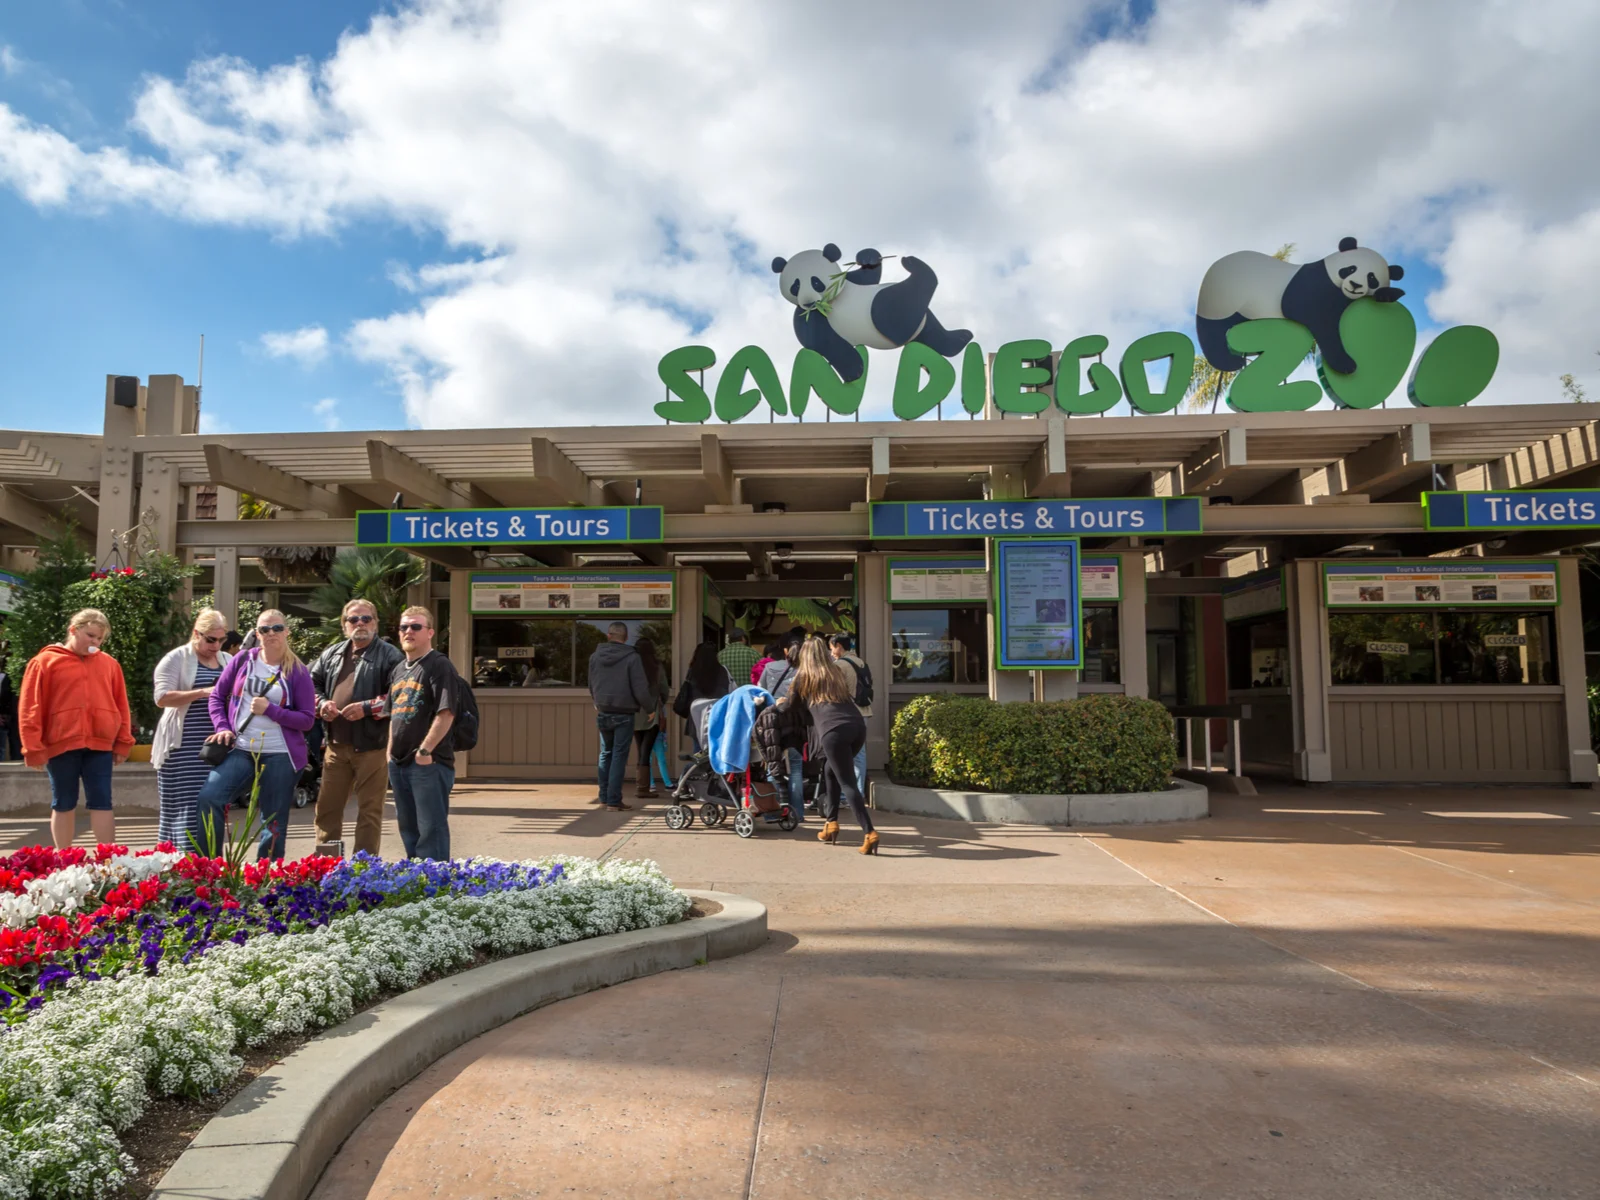 Entrance to the San Diego Zoo, one of the best in the world